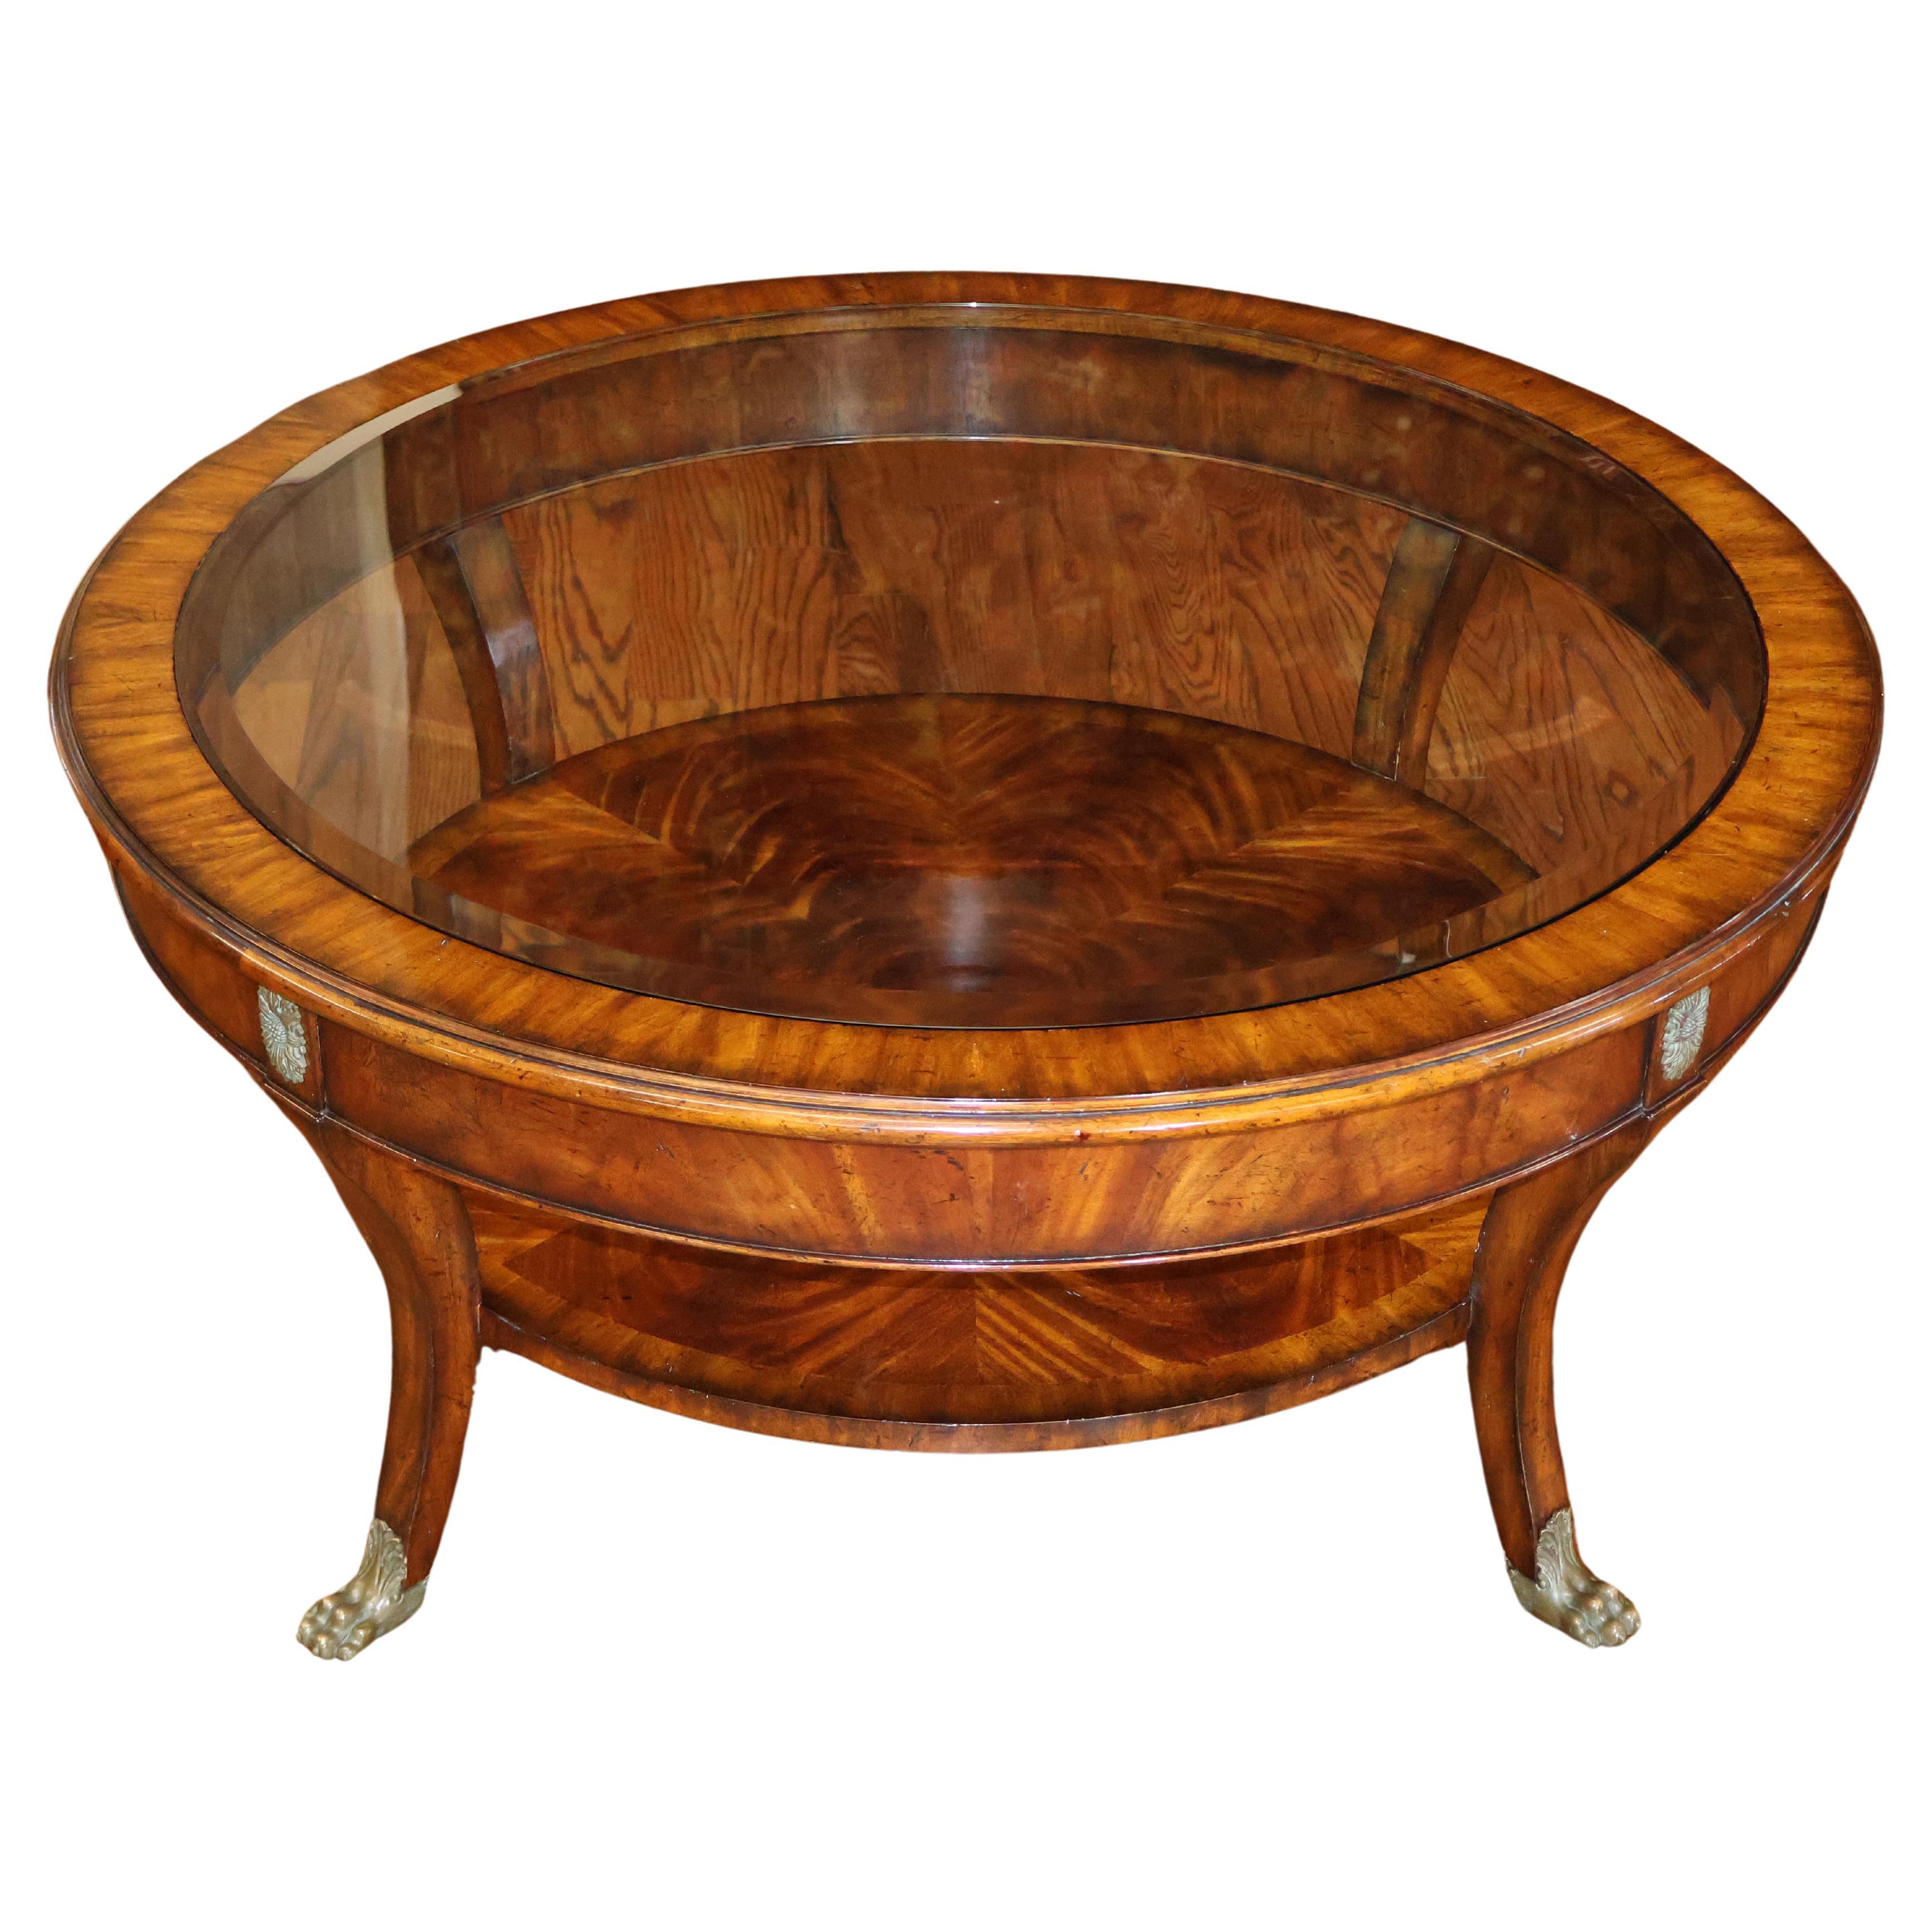 Maitland Smith Regency Style Mahogany Round Glass Top Cocktail Coffee Table  For Sale